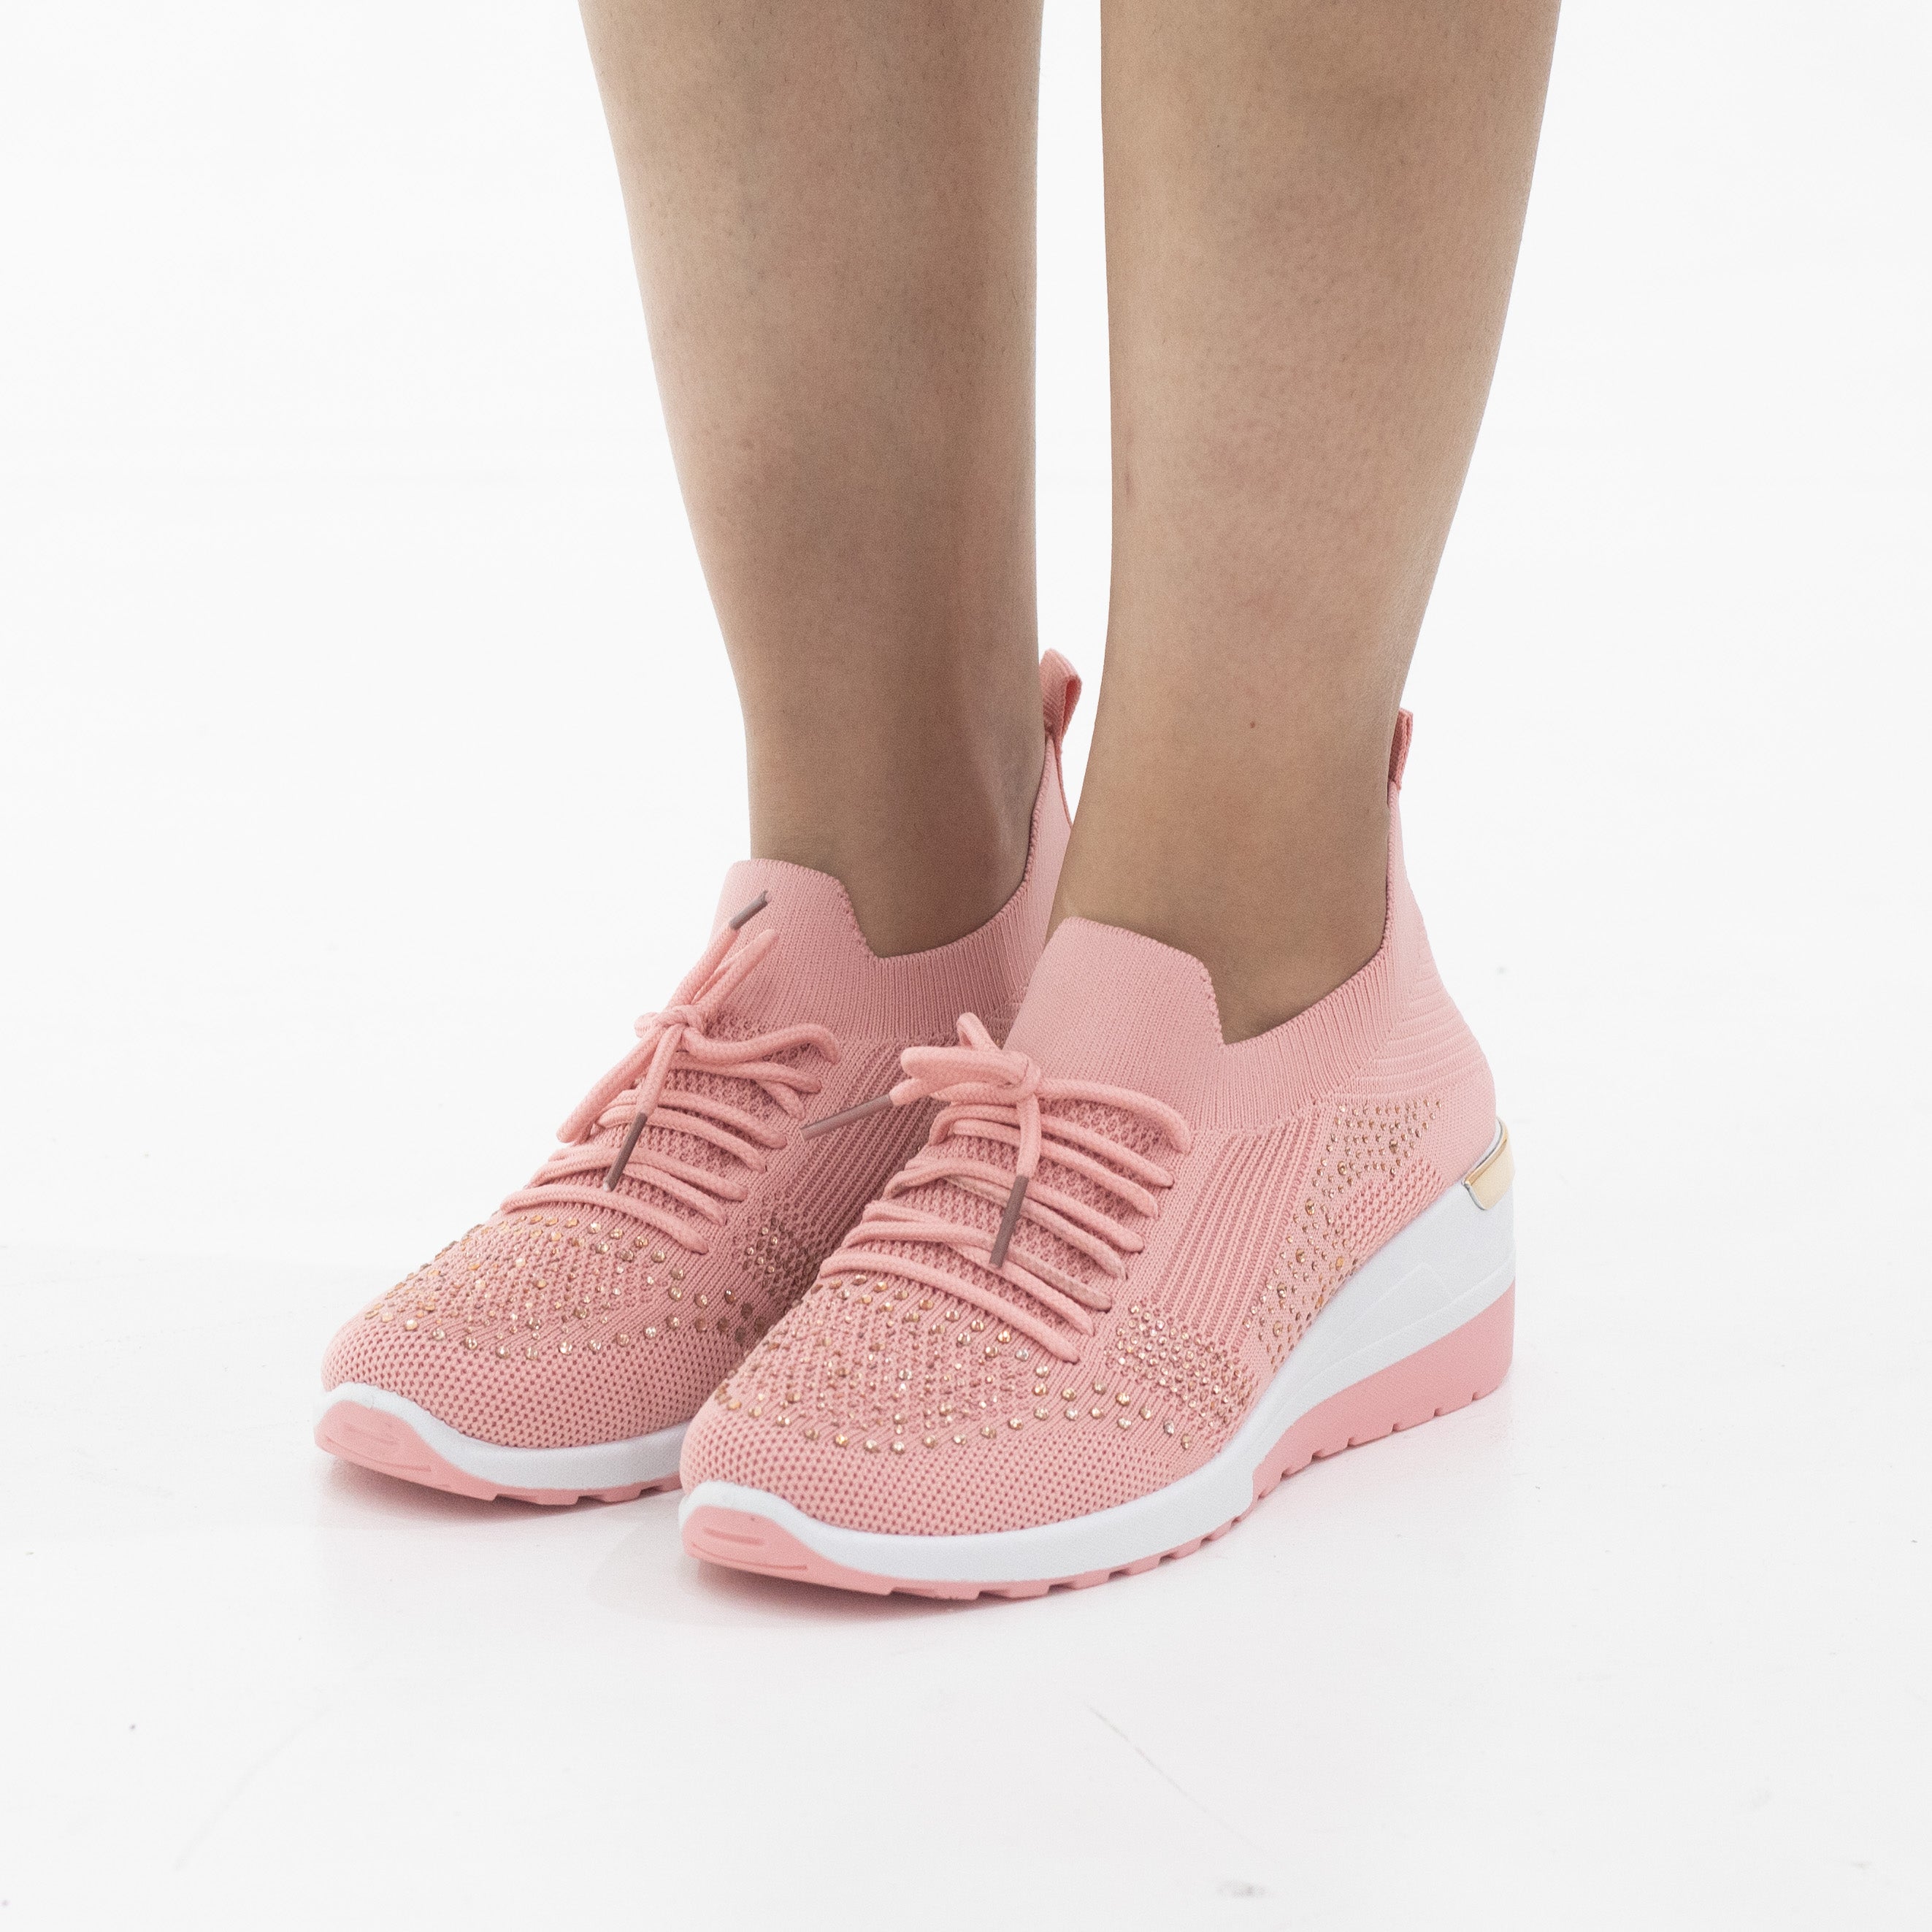 Pink fly knit lace up sneaker with diamonds obioma